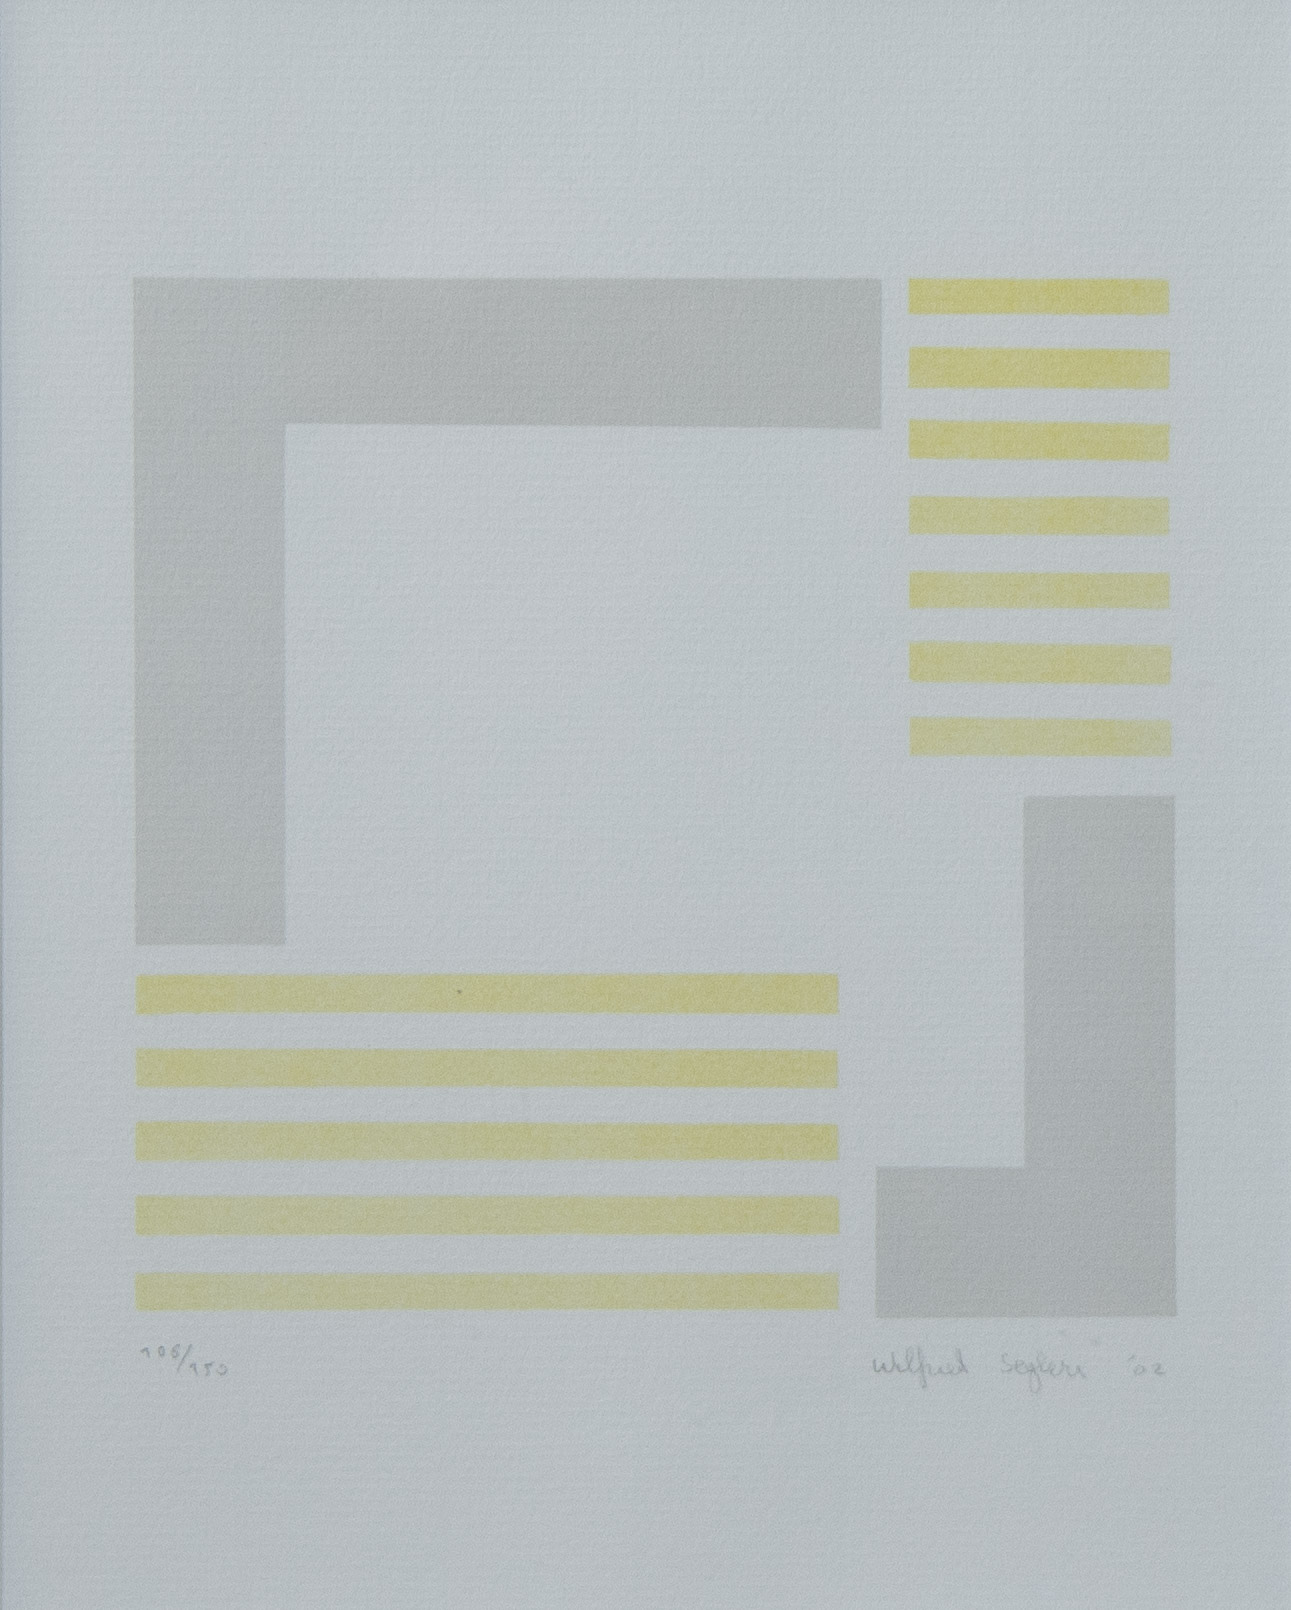 Wilfried SEGHERS (1953), lithograph Untitled, numbered 106/150, signed and dated '02